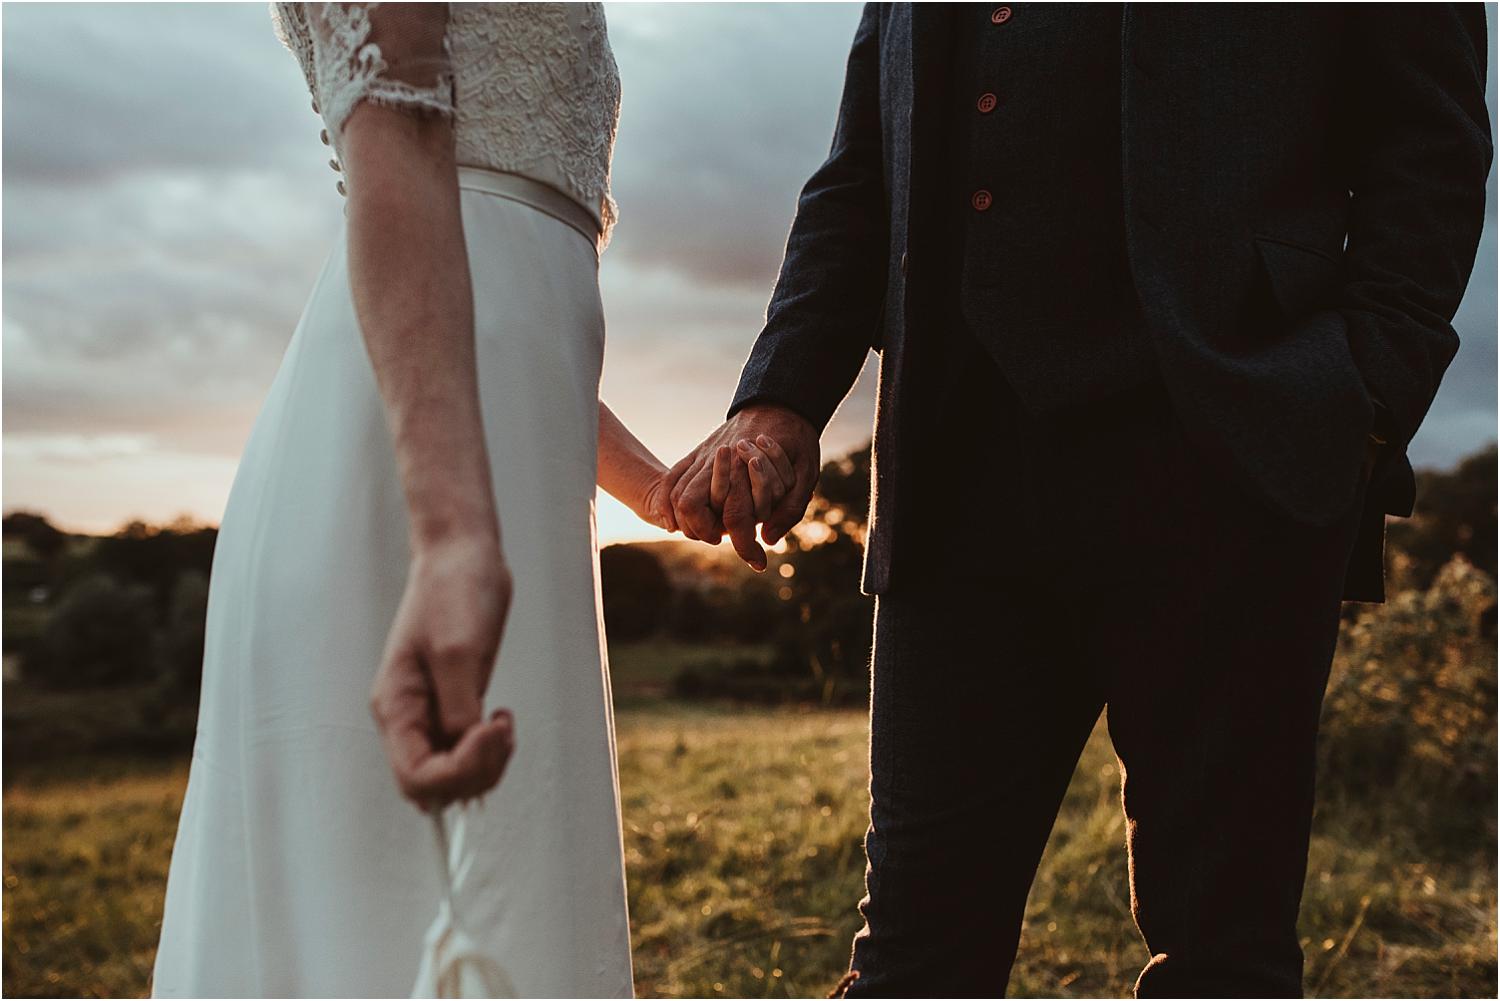 holding hands at a festival themed wedding